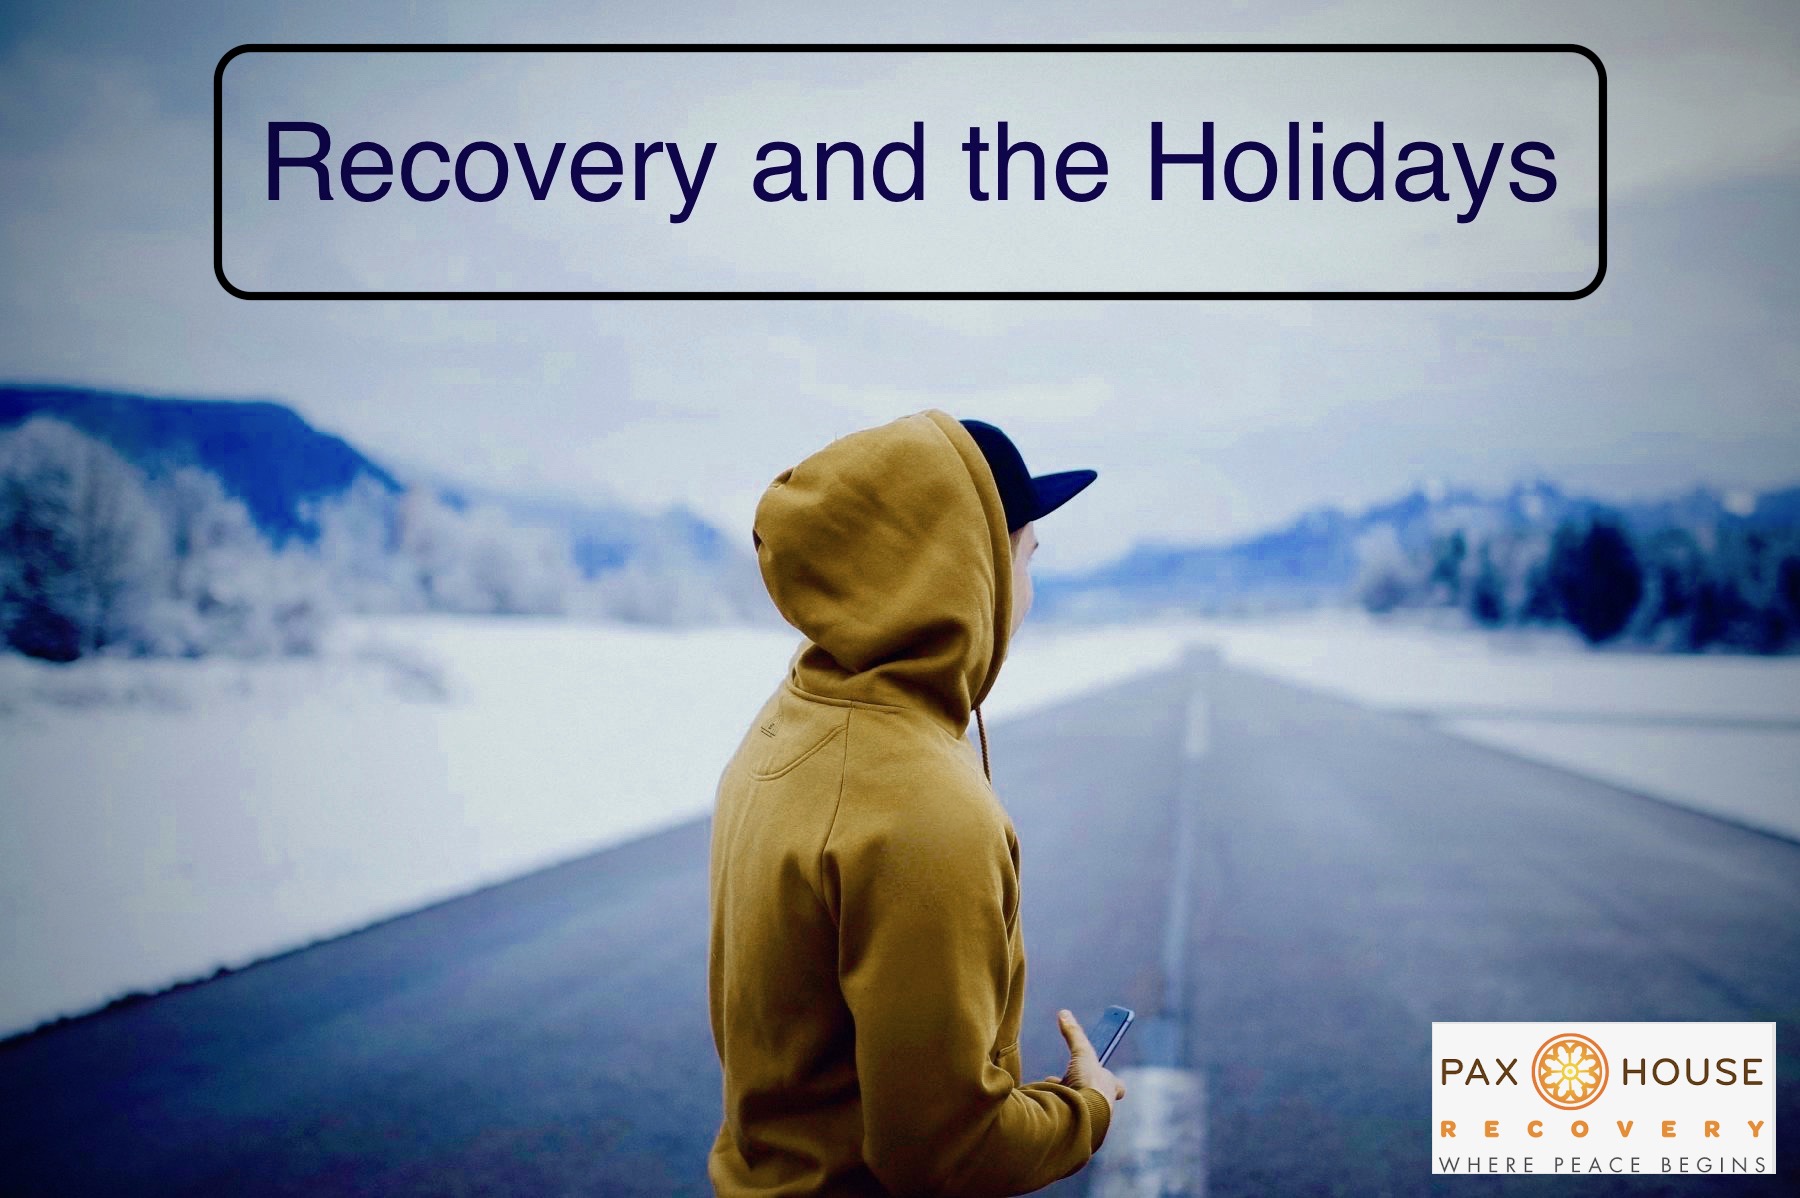 SURVIVING THE HOLIDAYS SOBER